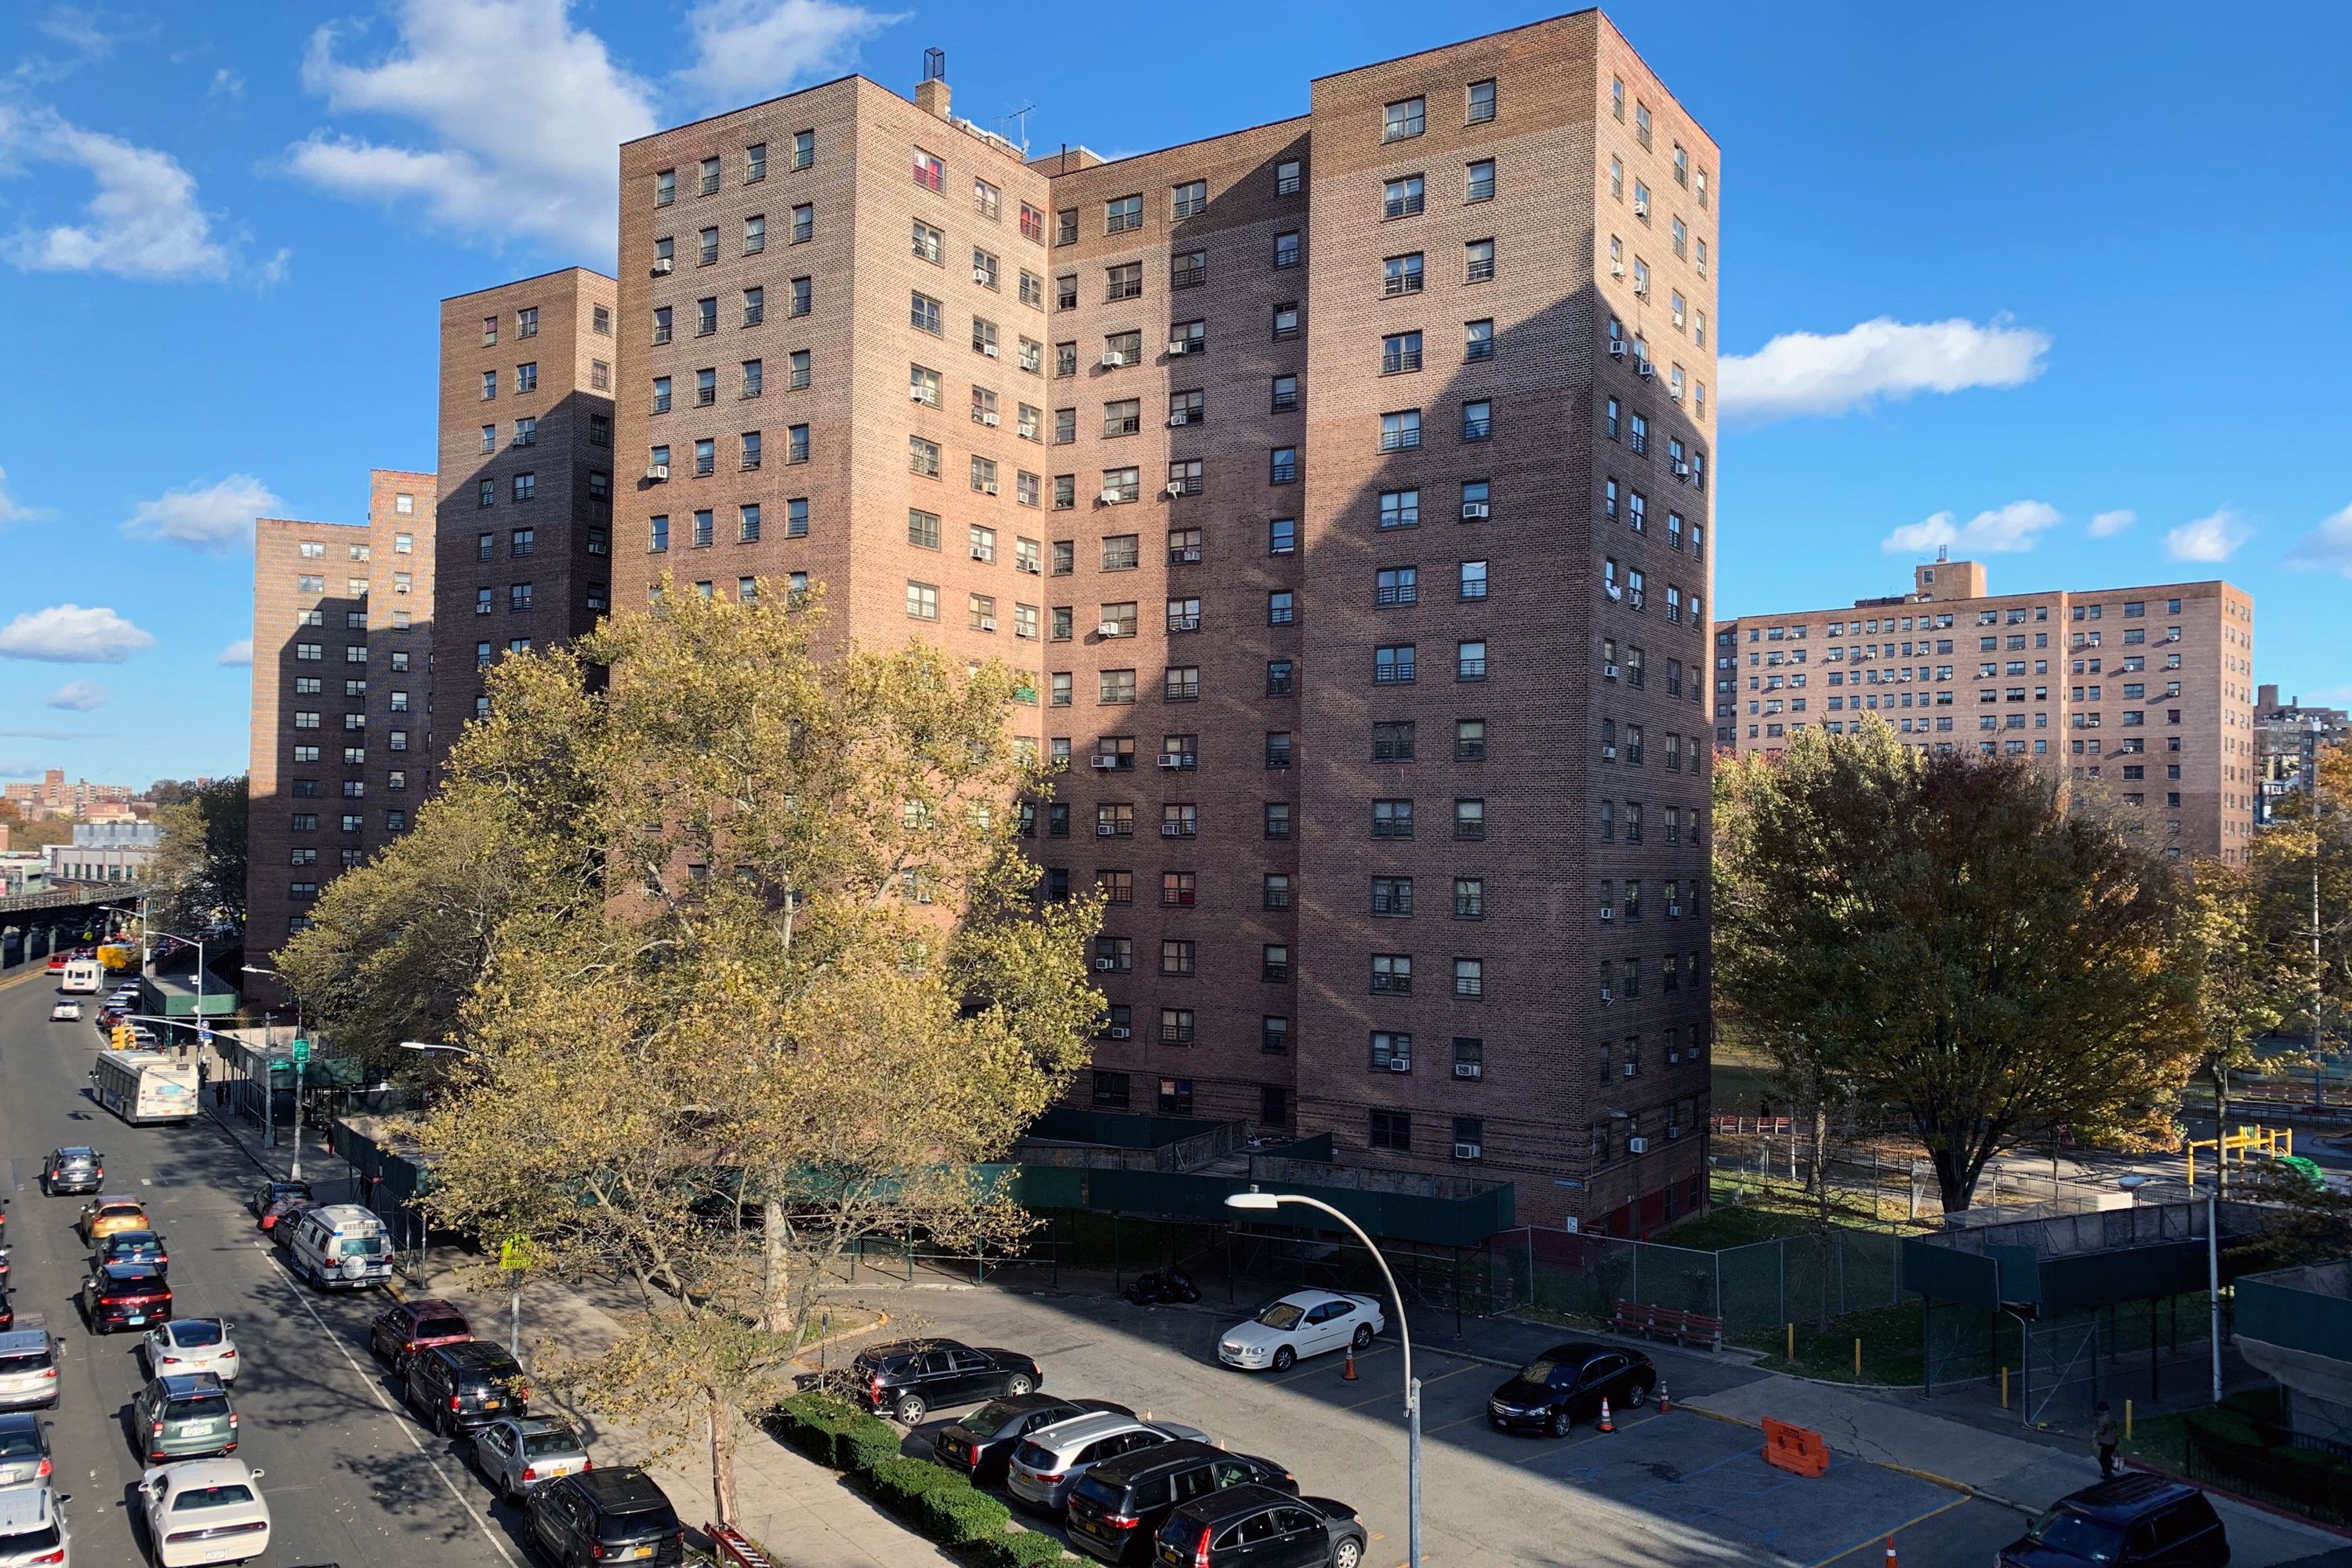 Like many NYCHA developments, the Marble Hill Houses have been plagued by heat and hot-water outages for years.